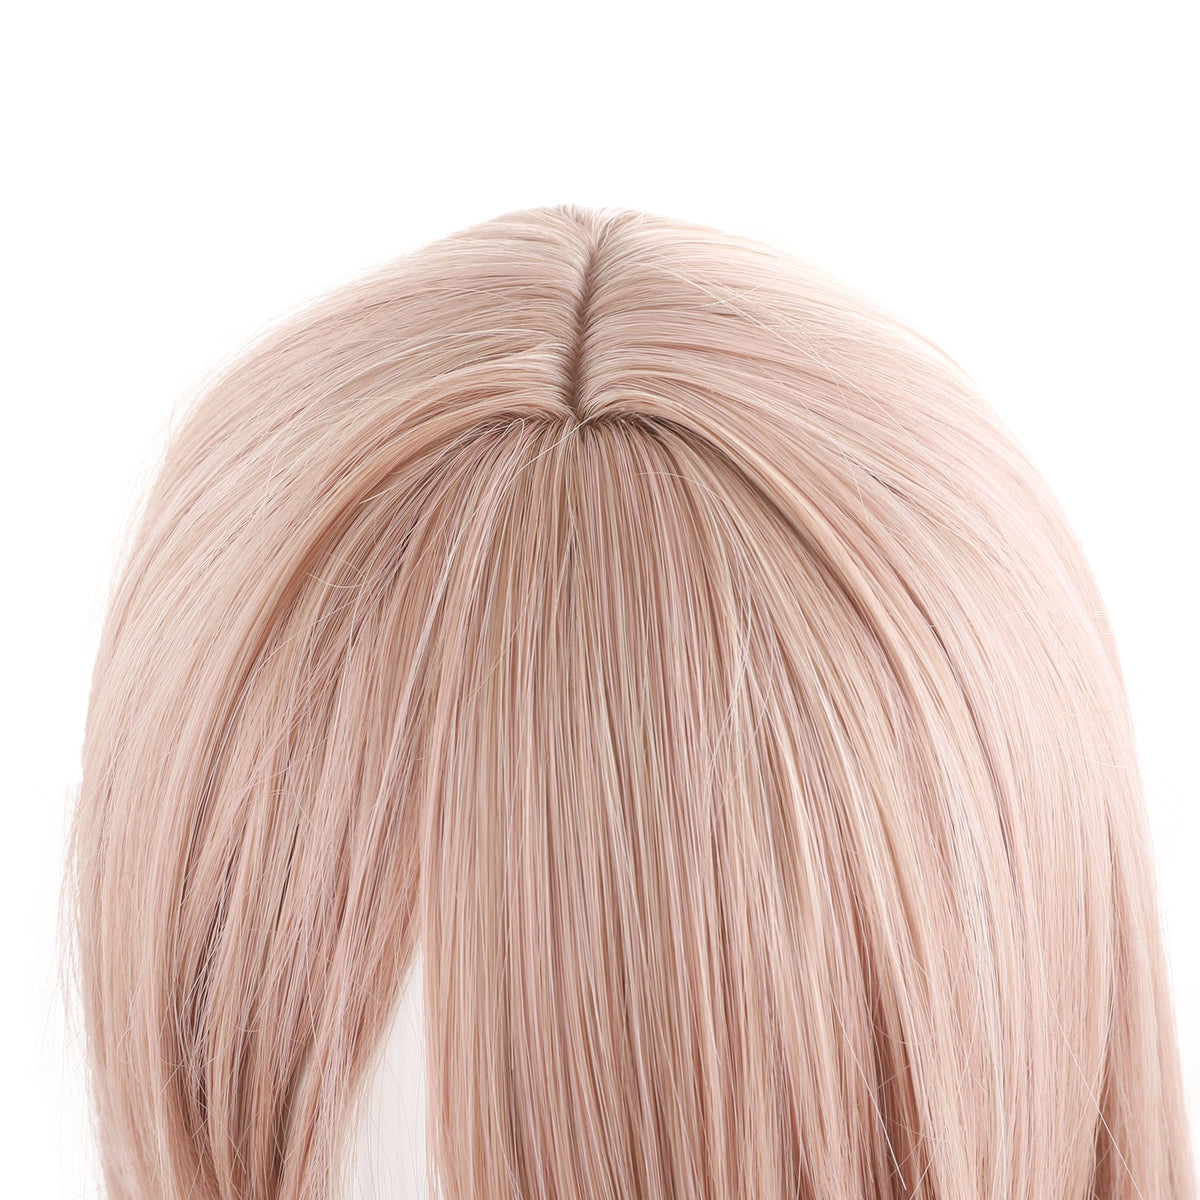 Game GODDESS OF VICTORY NIKKE Viper Brown Long Cosplay Wig